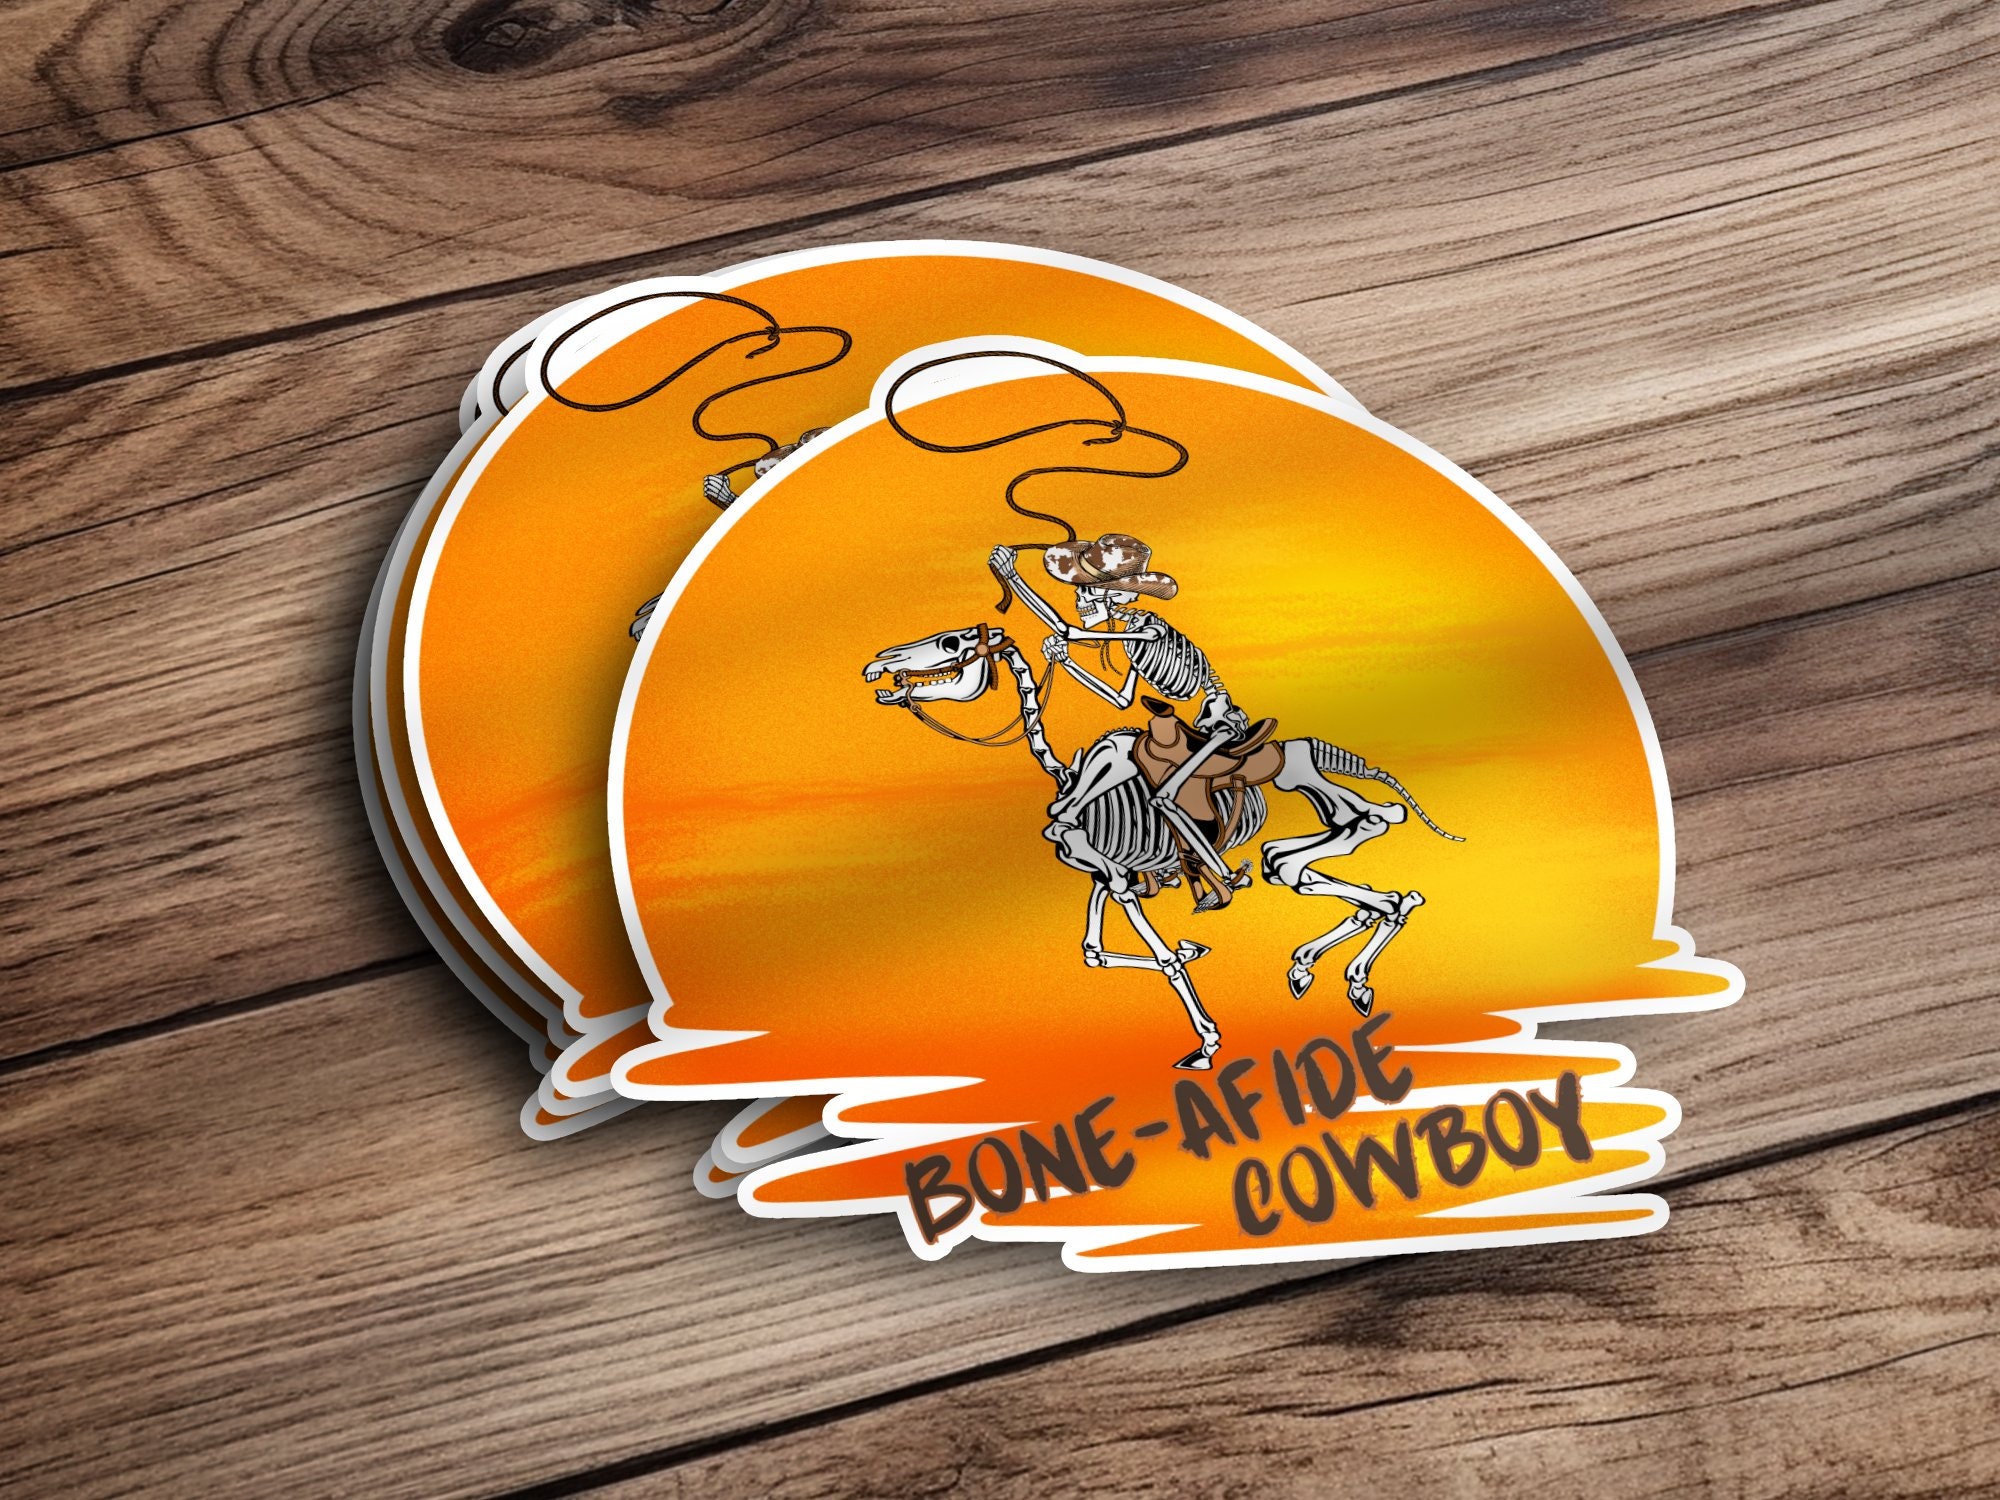 Discover Halloween Sticker Skeleton Roping Cowboy, Matte Vinyl Sticker for Water bottle, Laptop, Planner or Notebook, Water Resistant, Cut to Size